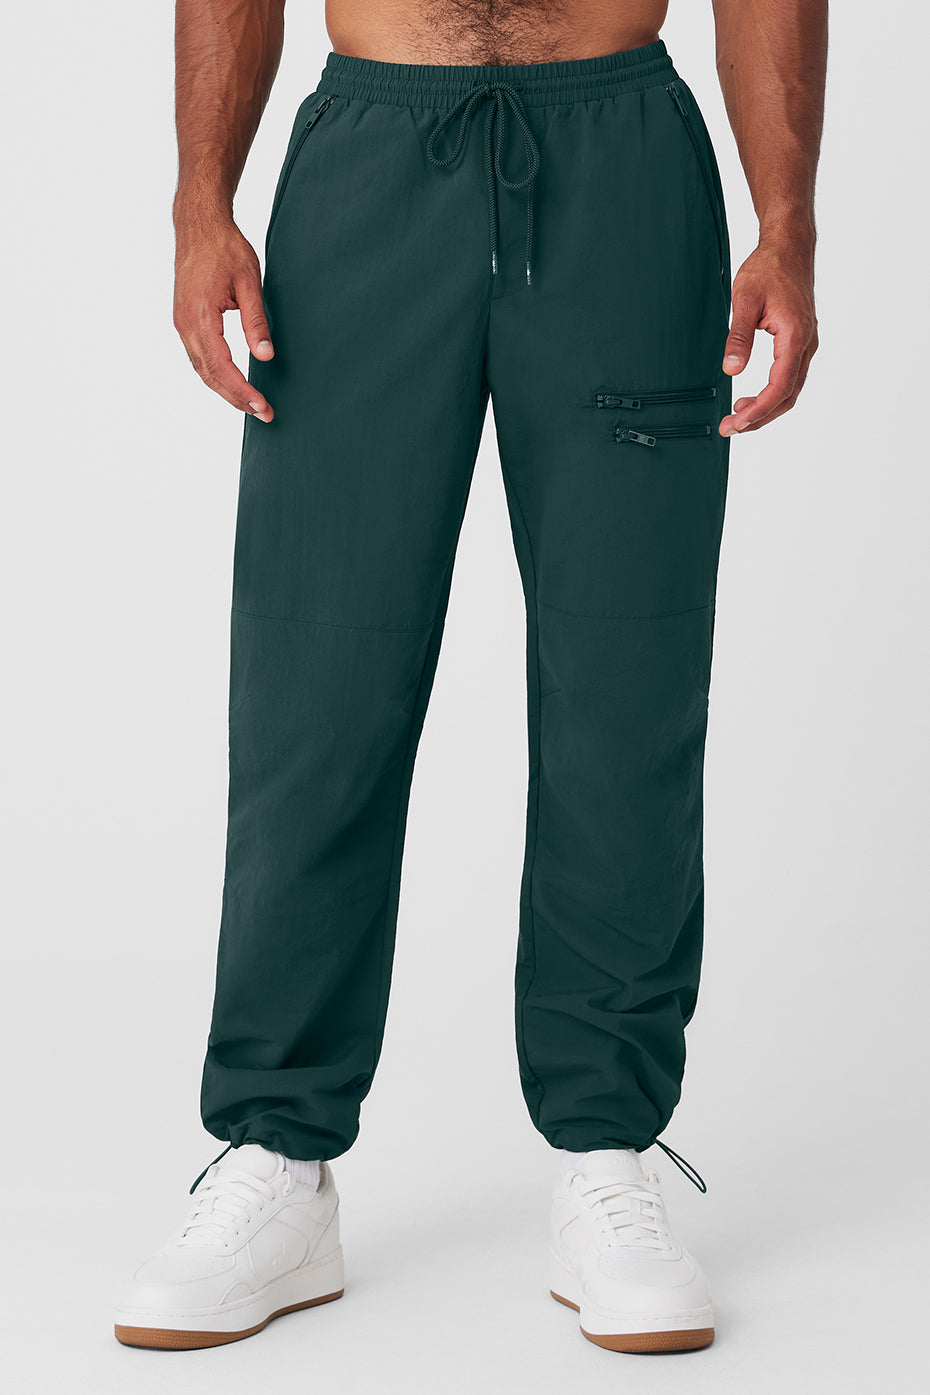 Alo Track & Sweat Pants for Men